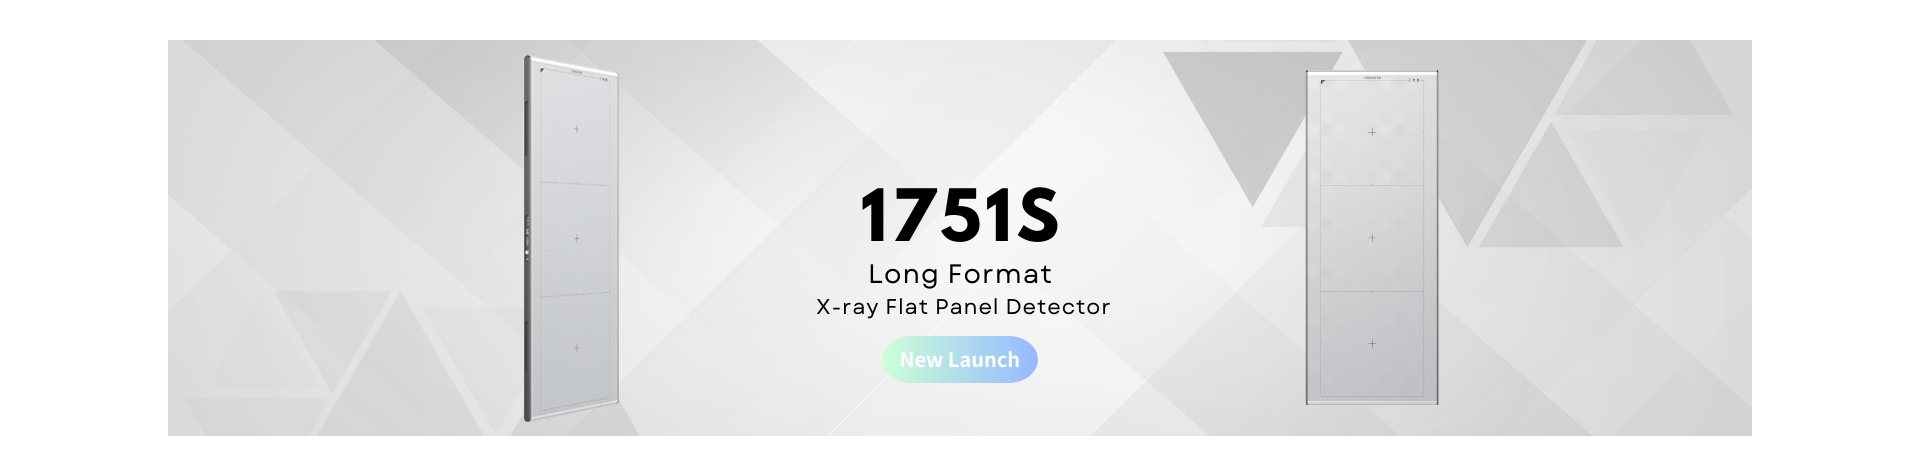 1751S Long Format FPD New Launch